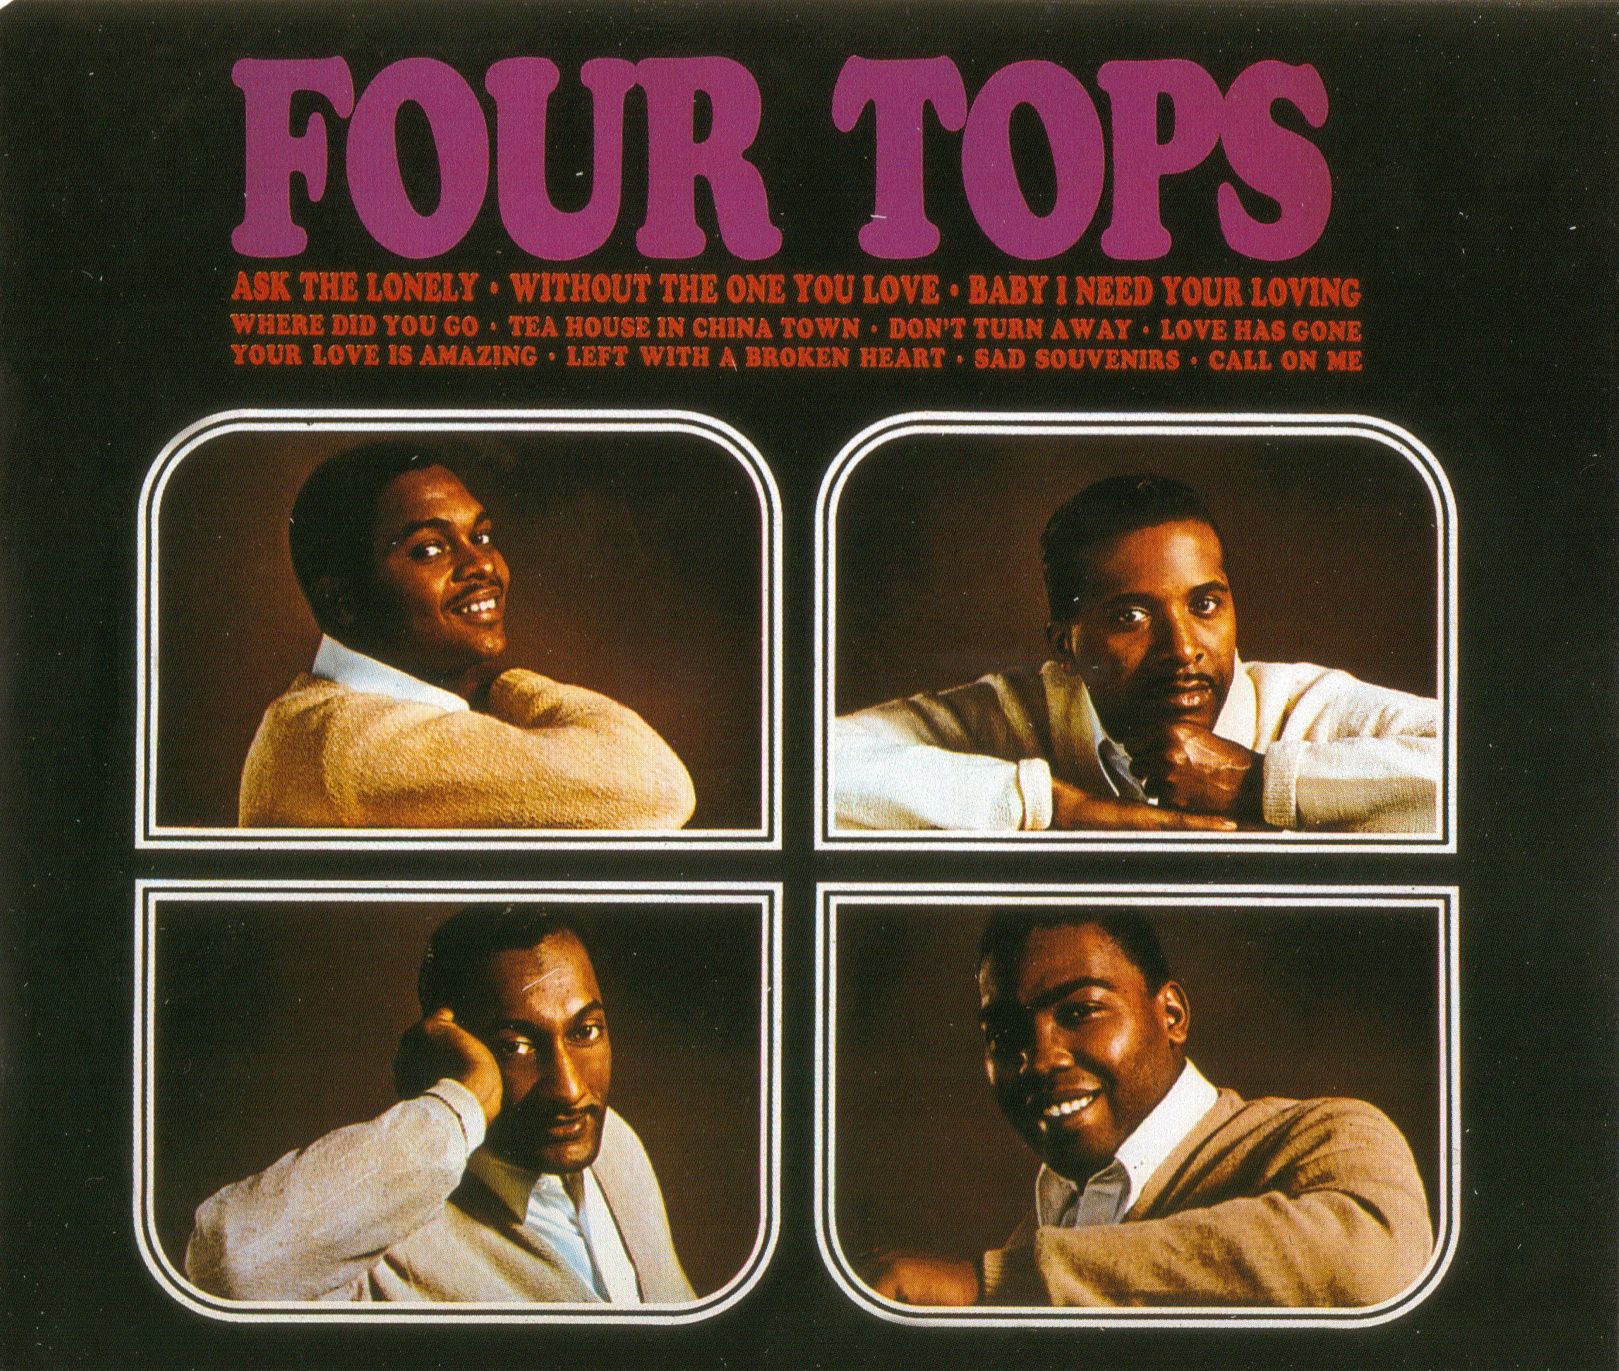 The Four Tops - The Four Tops